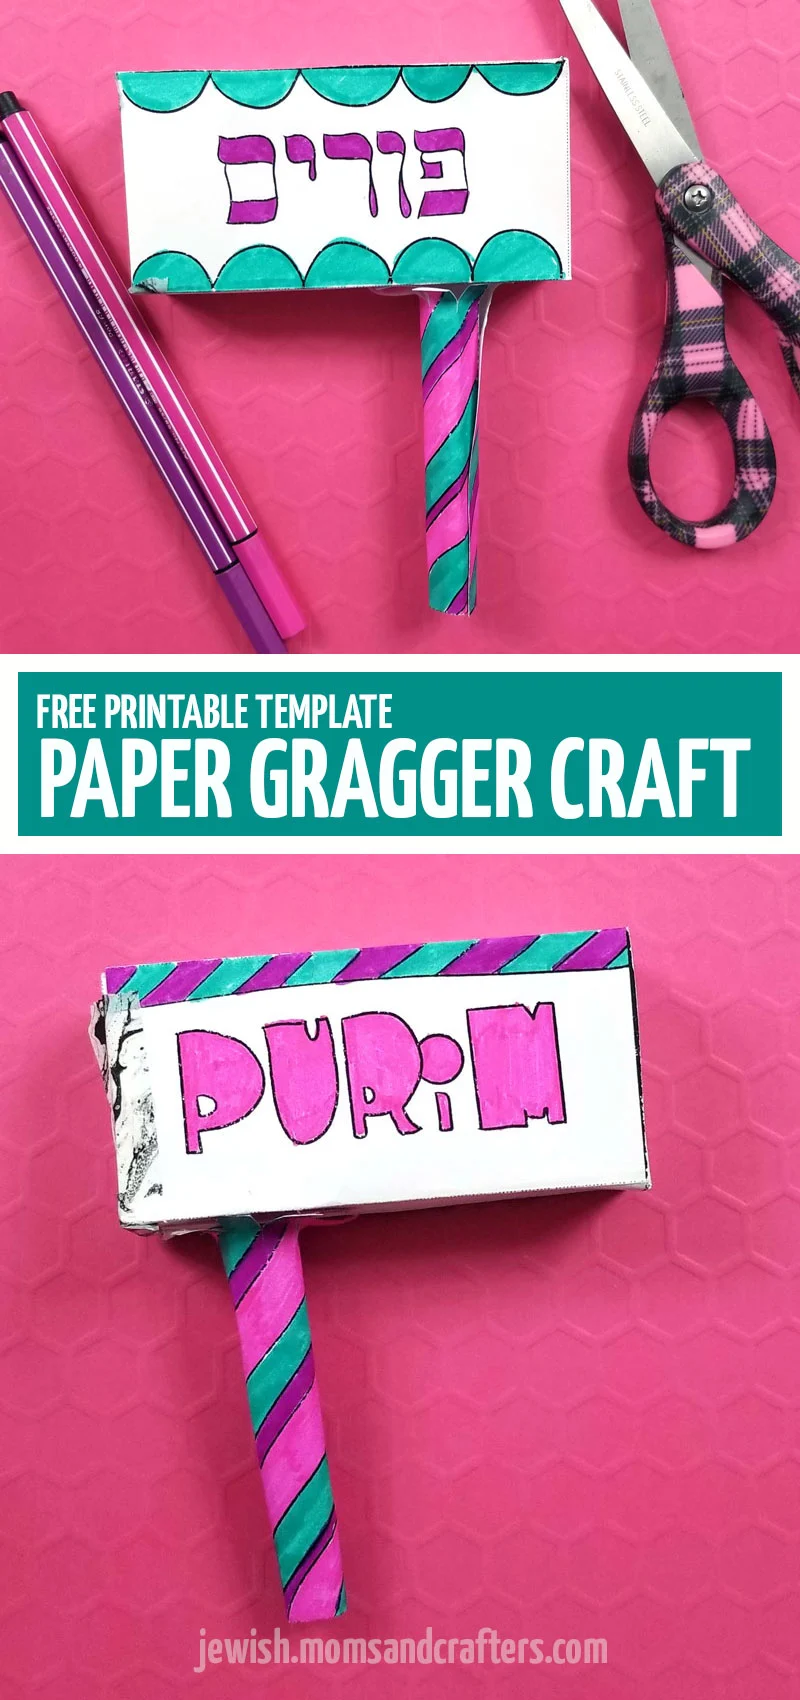 Click to download this free printable paper gragger craft for Purim! Make your own purim Grogger using card stock and a few other easy simple material with an easy DIY idea for kids teens or grown-ups.